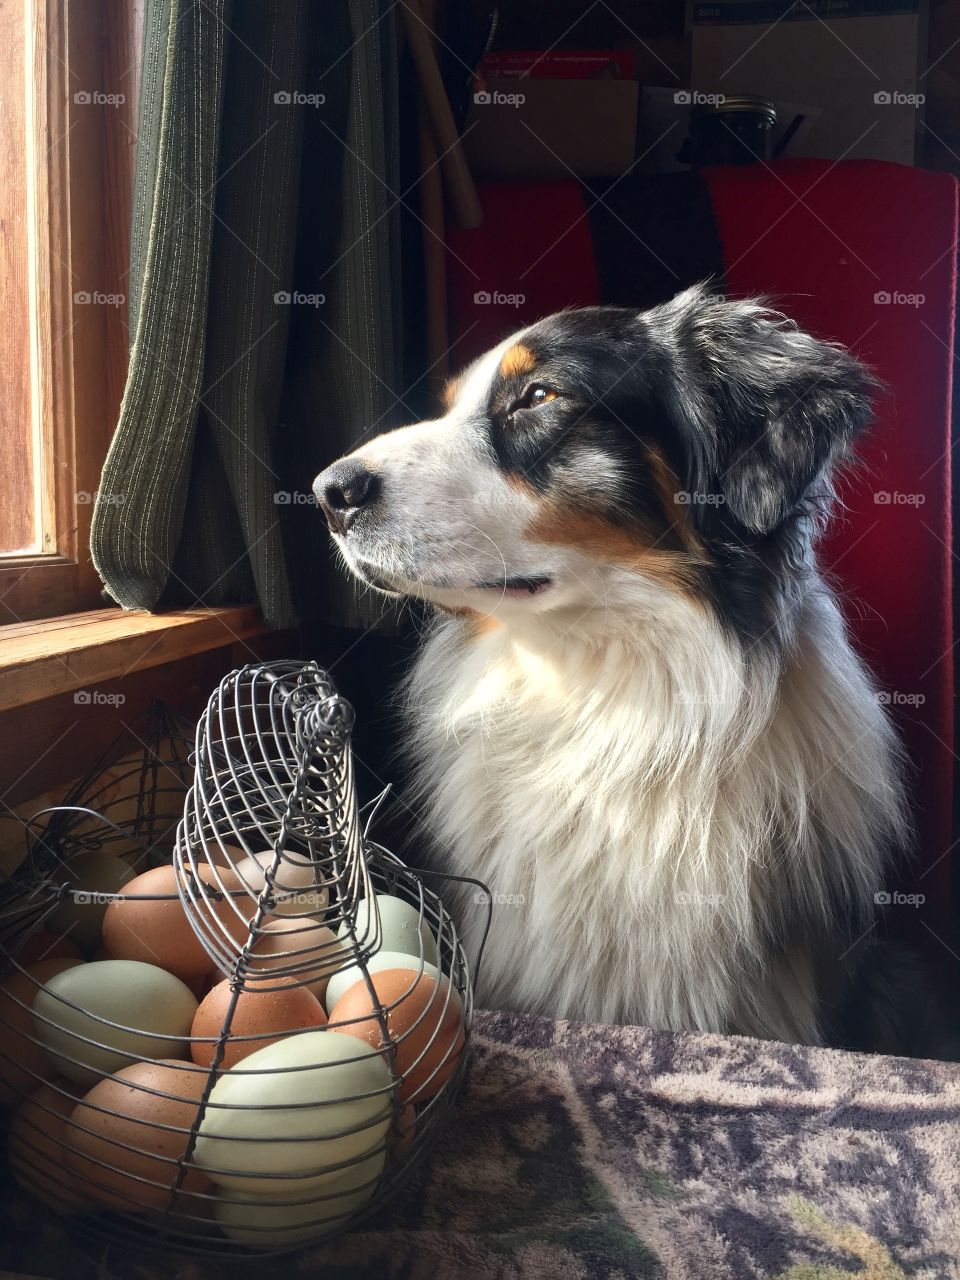 Rainy dog days staring out the cabin window over the wire egg basket. Australian Shepherd still watches his flock. 